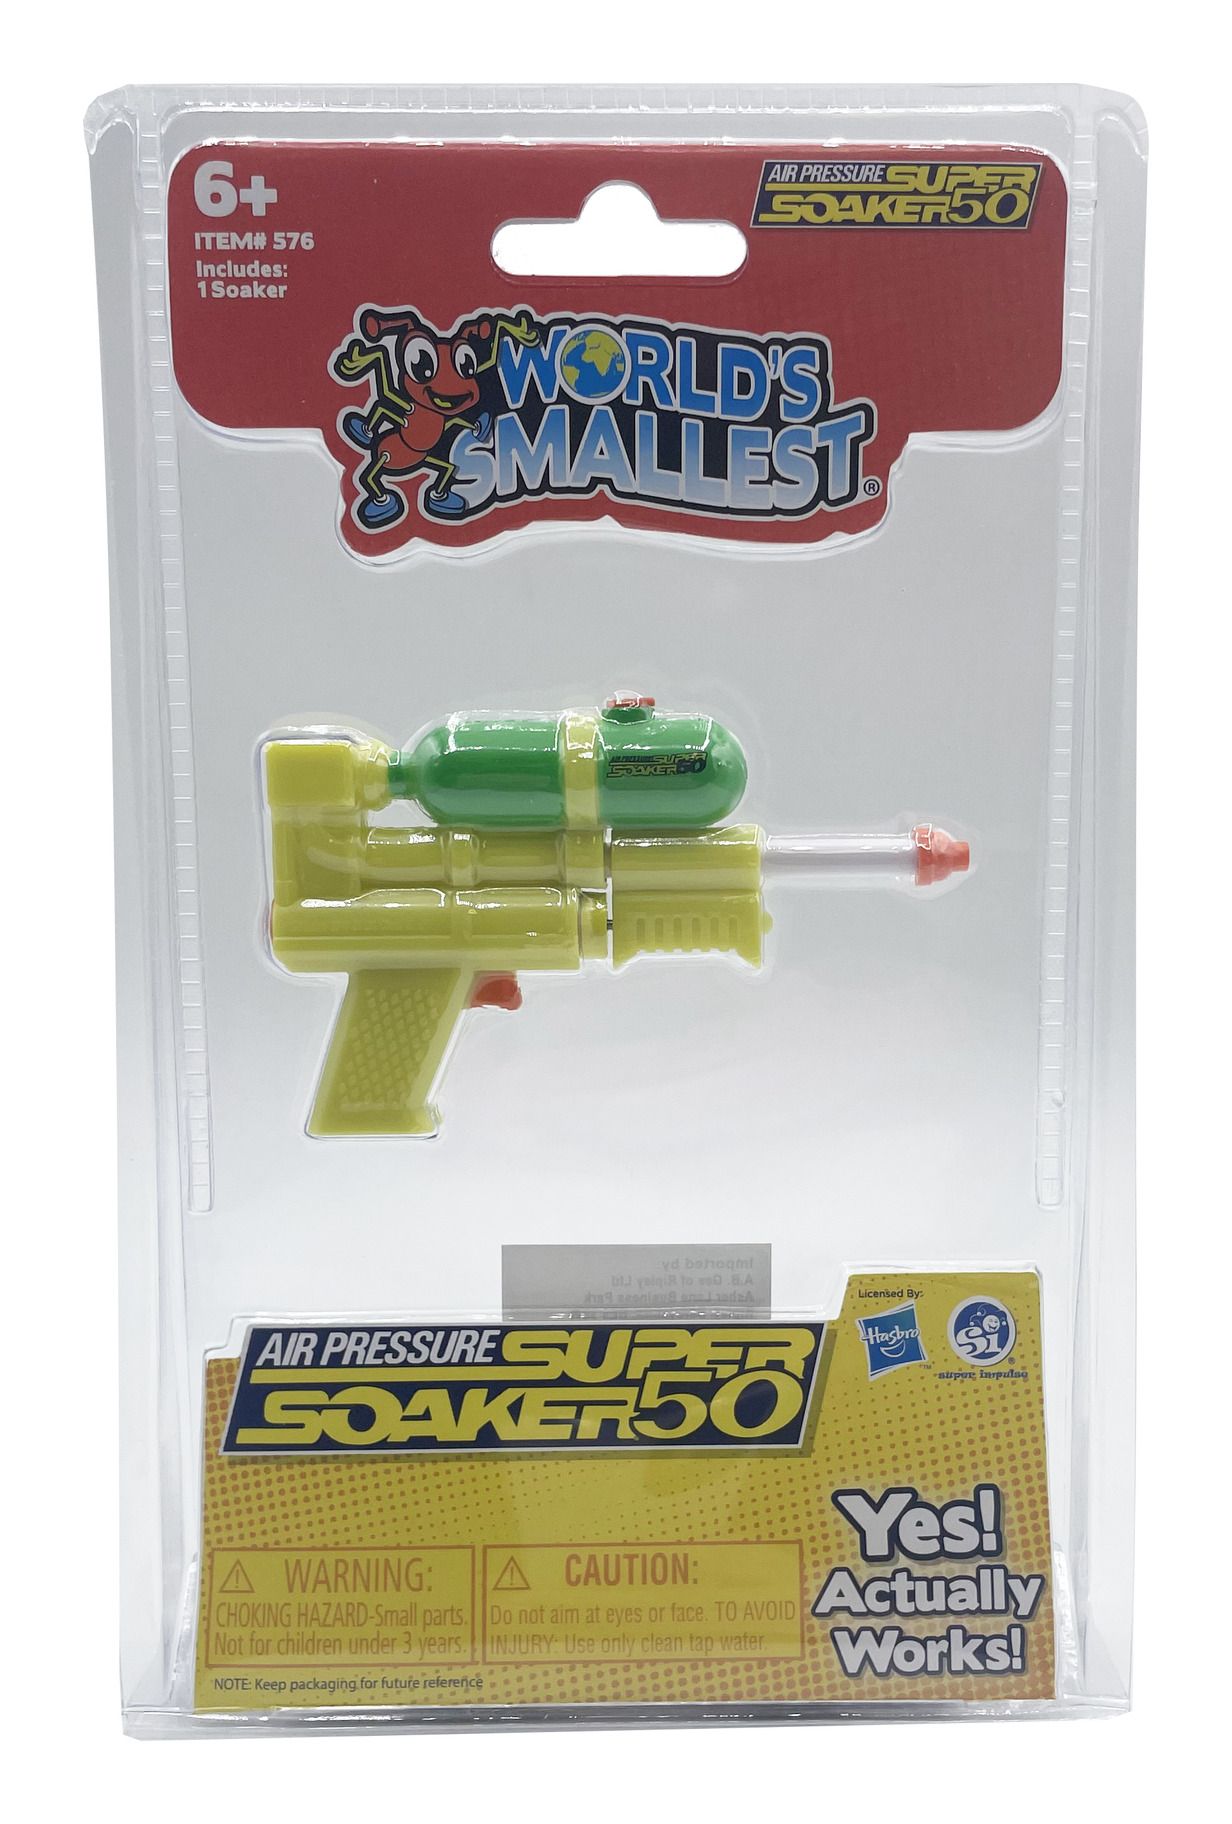 NEW* Spyra Two Duel Electronic Water Gun Set - Red+Blue / World's